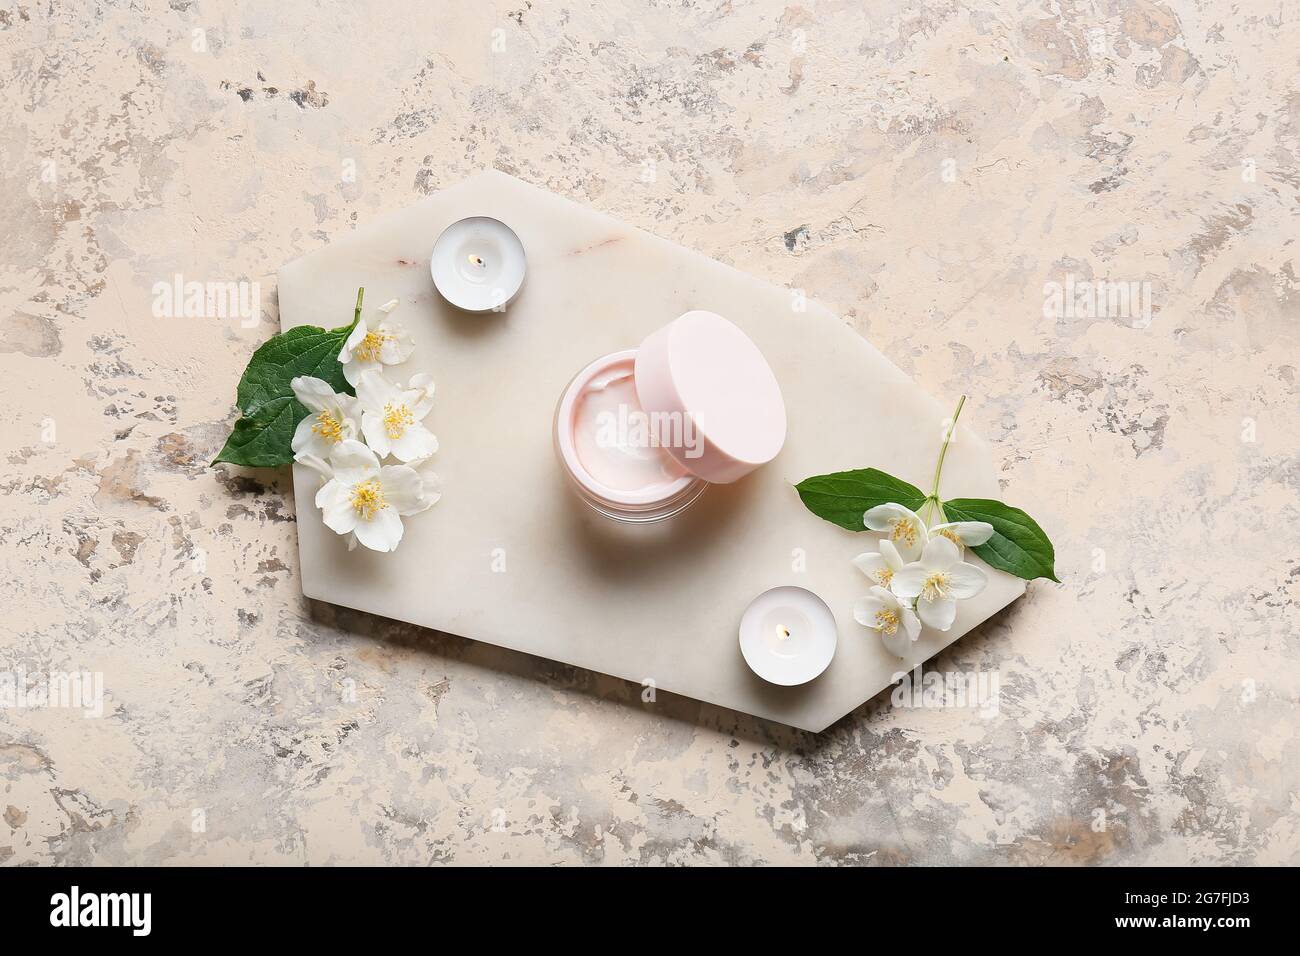 Composition with jar of cream, burning candles and jasmine flowers on grunge background Stock Photo